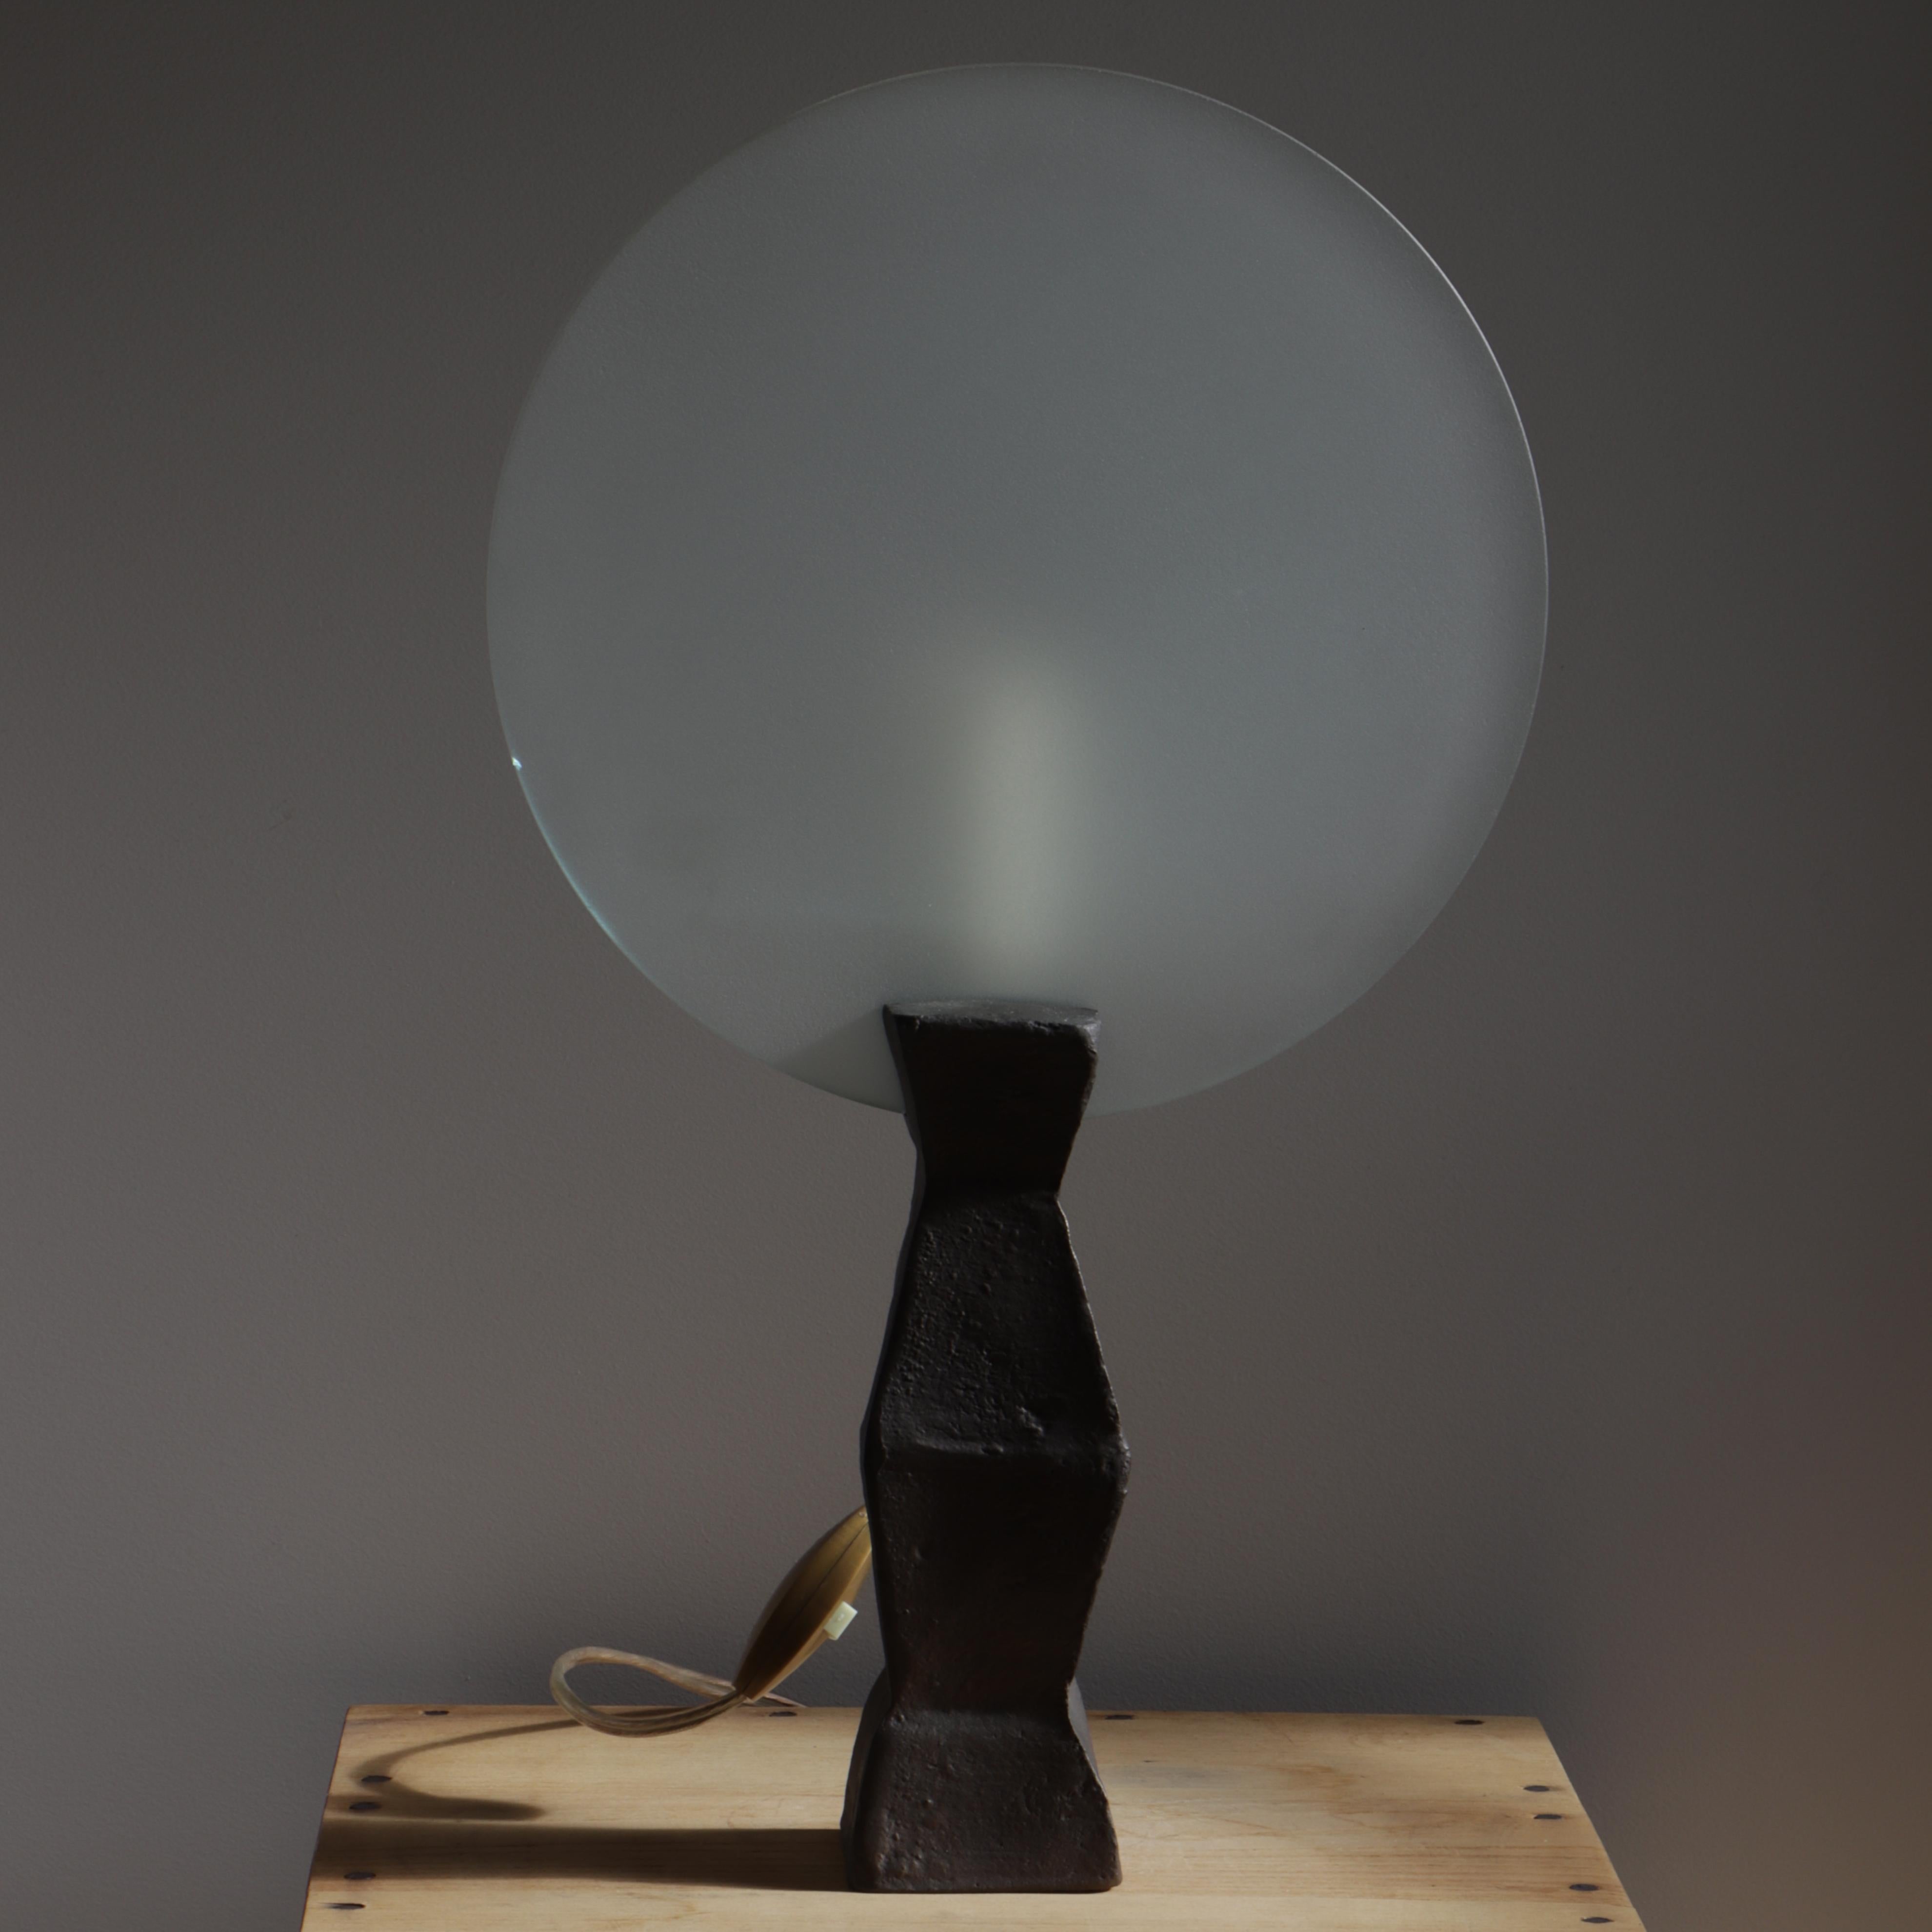 This lamp named « Lune », (moon), « En attendant les barbares » edition was designed by Elizabeth Garouste and Mattia Bonetti and dates from around 1983. It is composed of a bronze base, a flameless candle light and a circular frosted glass bulb